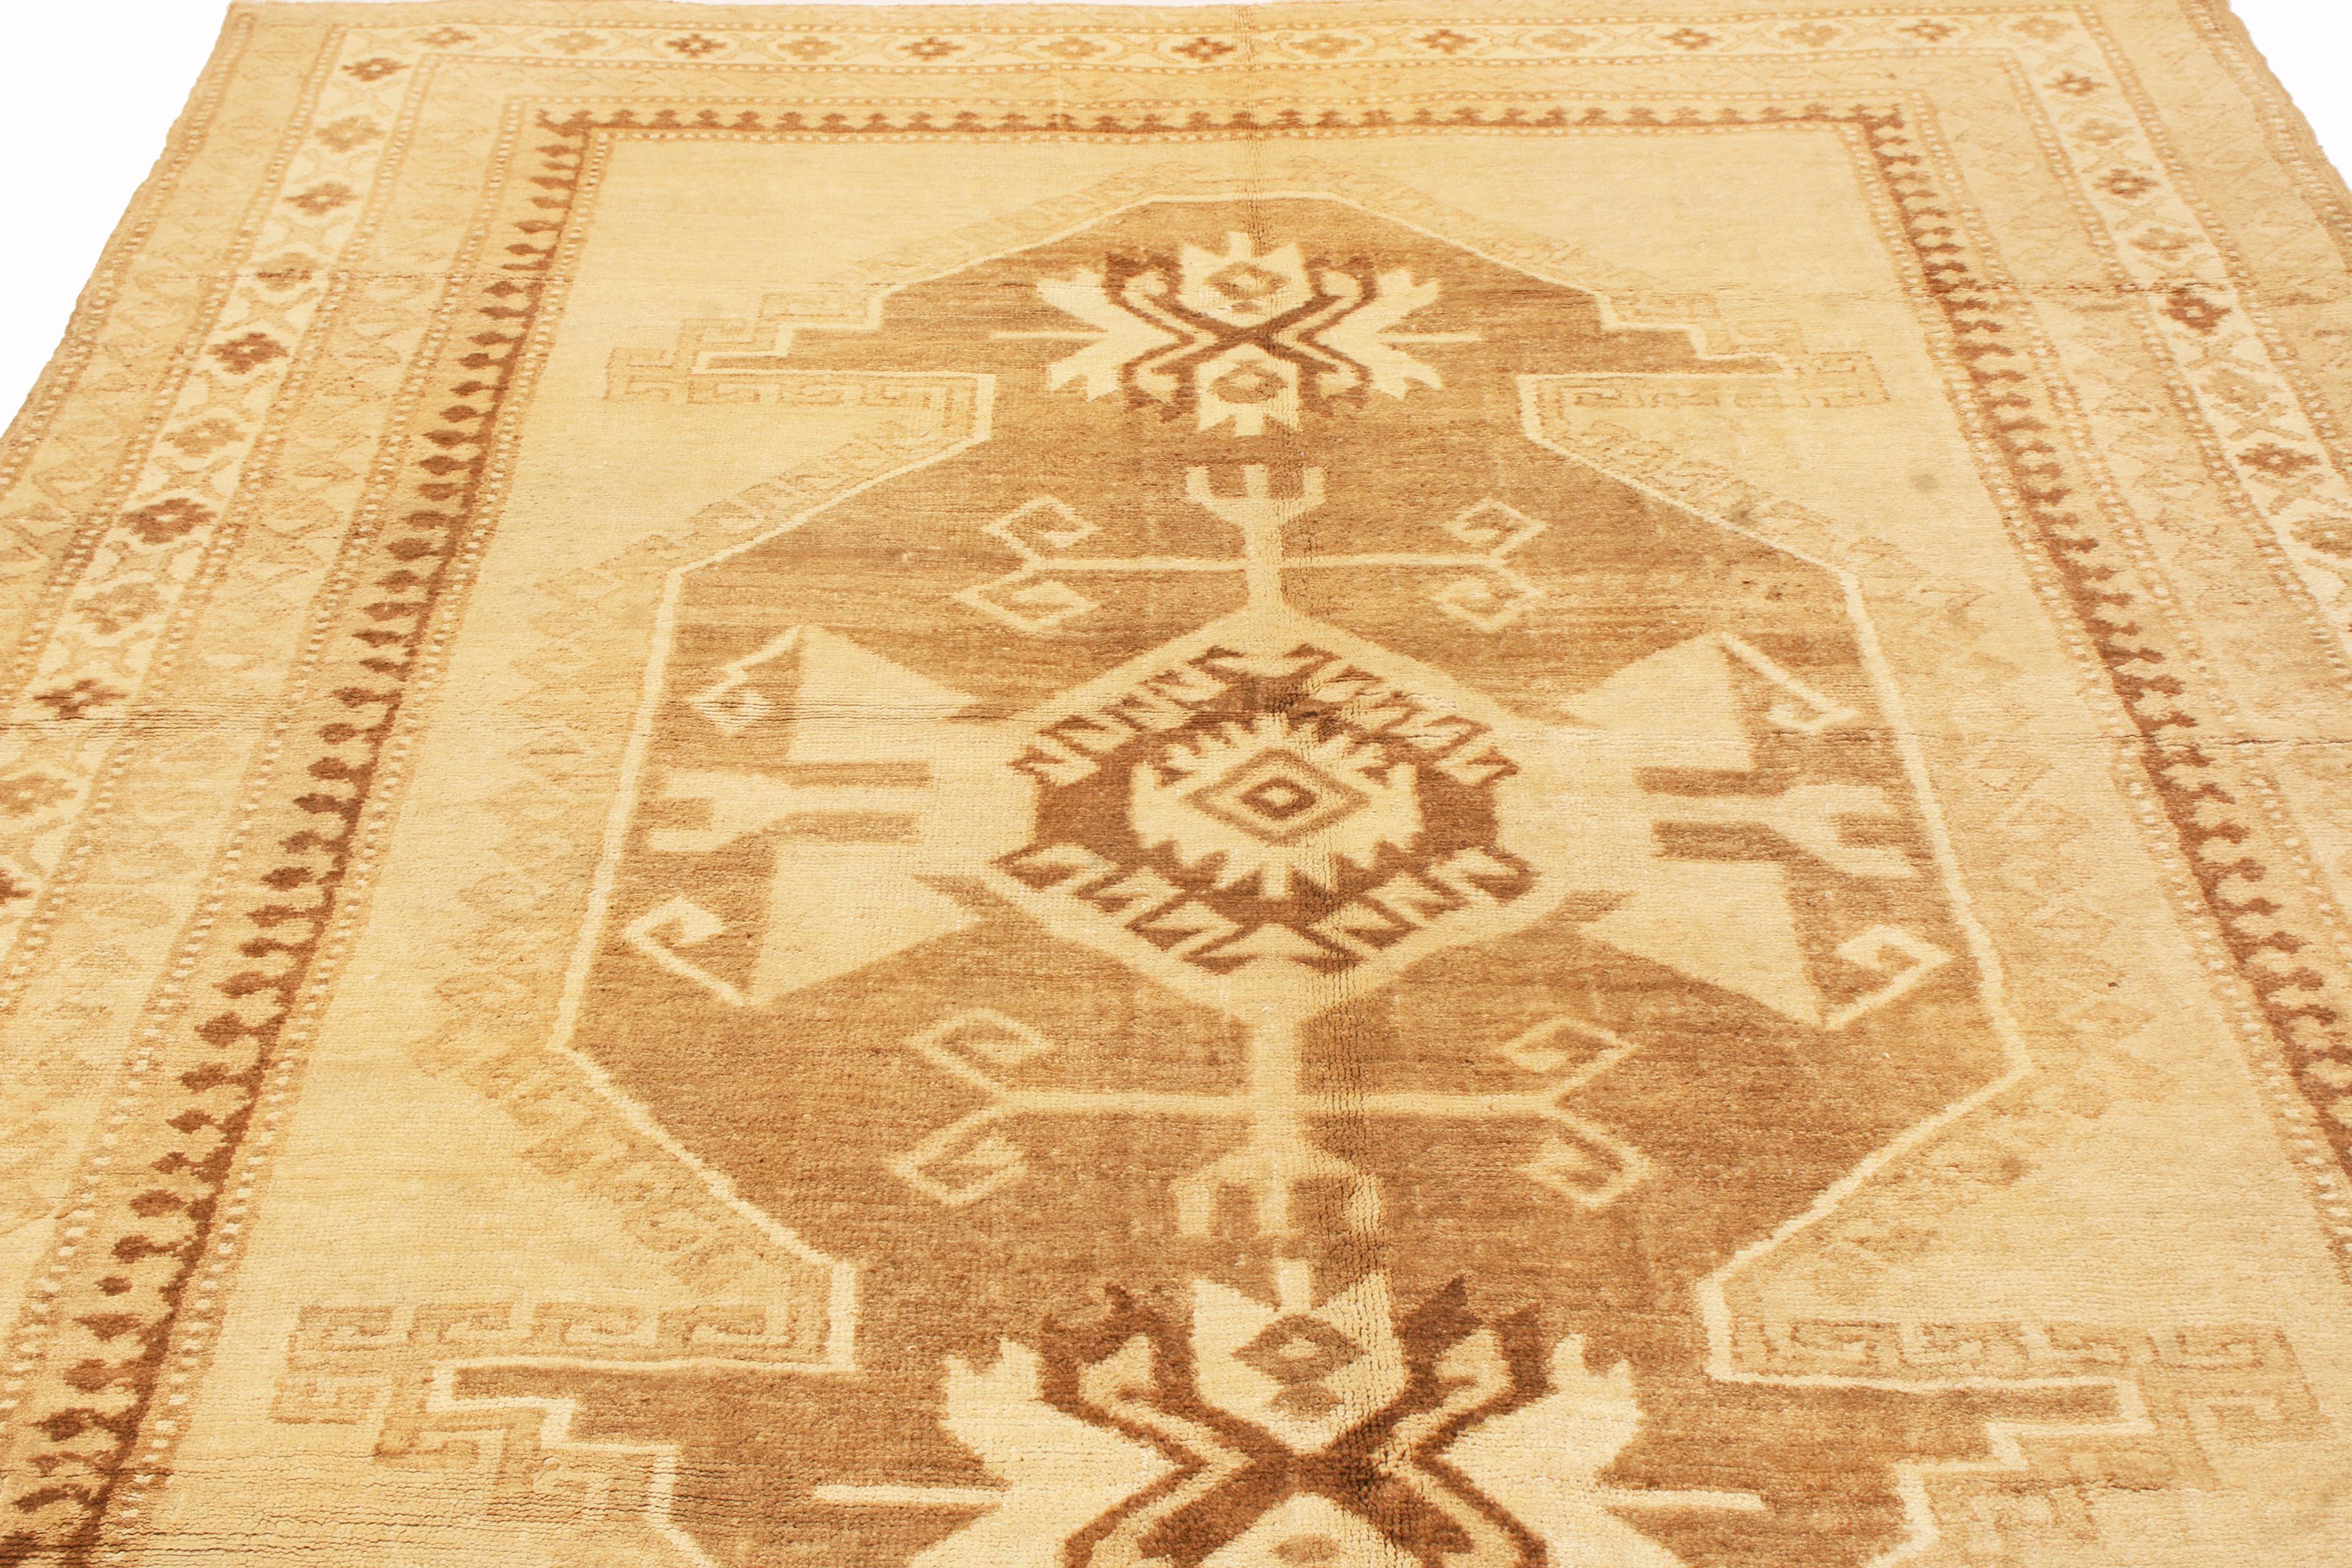 Originating from Turkey in 1960, this vintage transitional Kars hand knotted wool rug features a medallion style field design, sporting a wide variety of symbols including double rams horns signifying strength and masculinity, mirrored hooks for